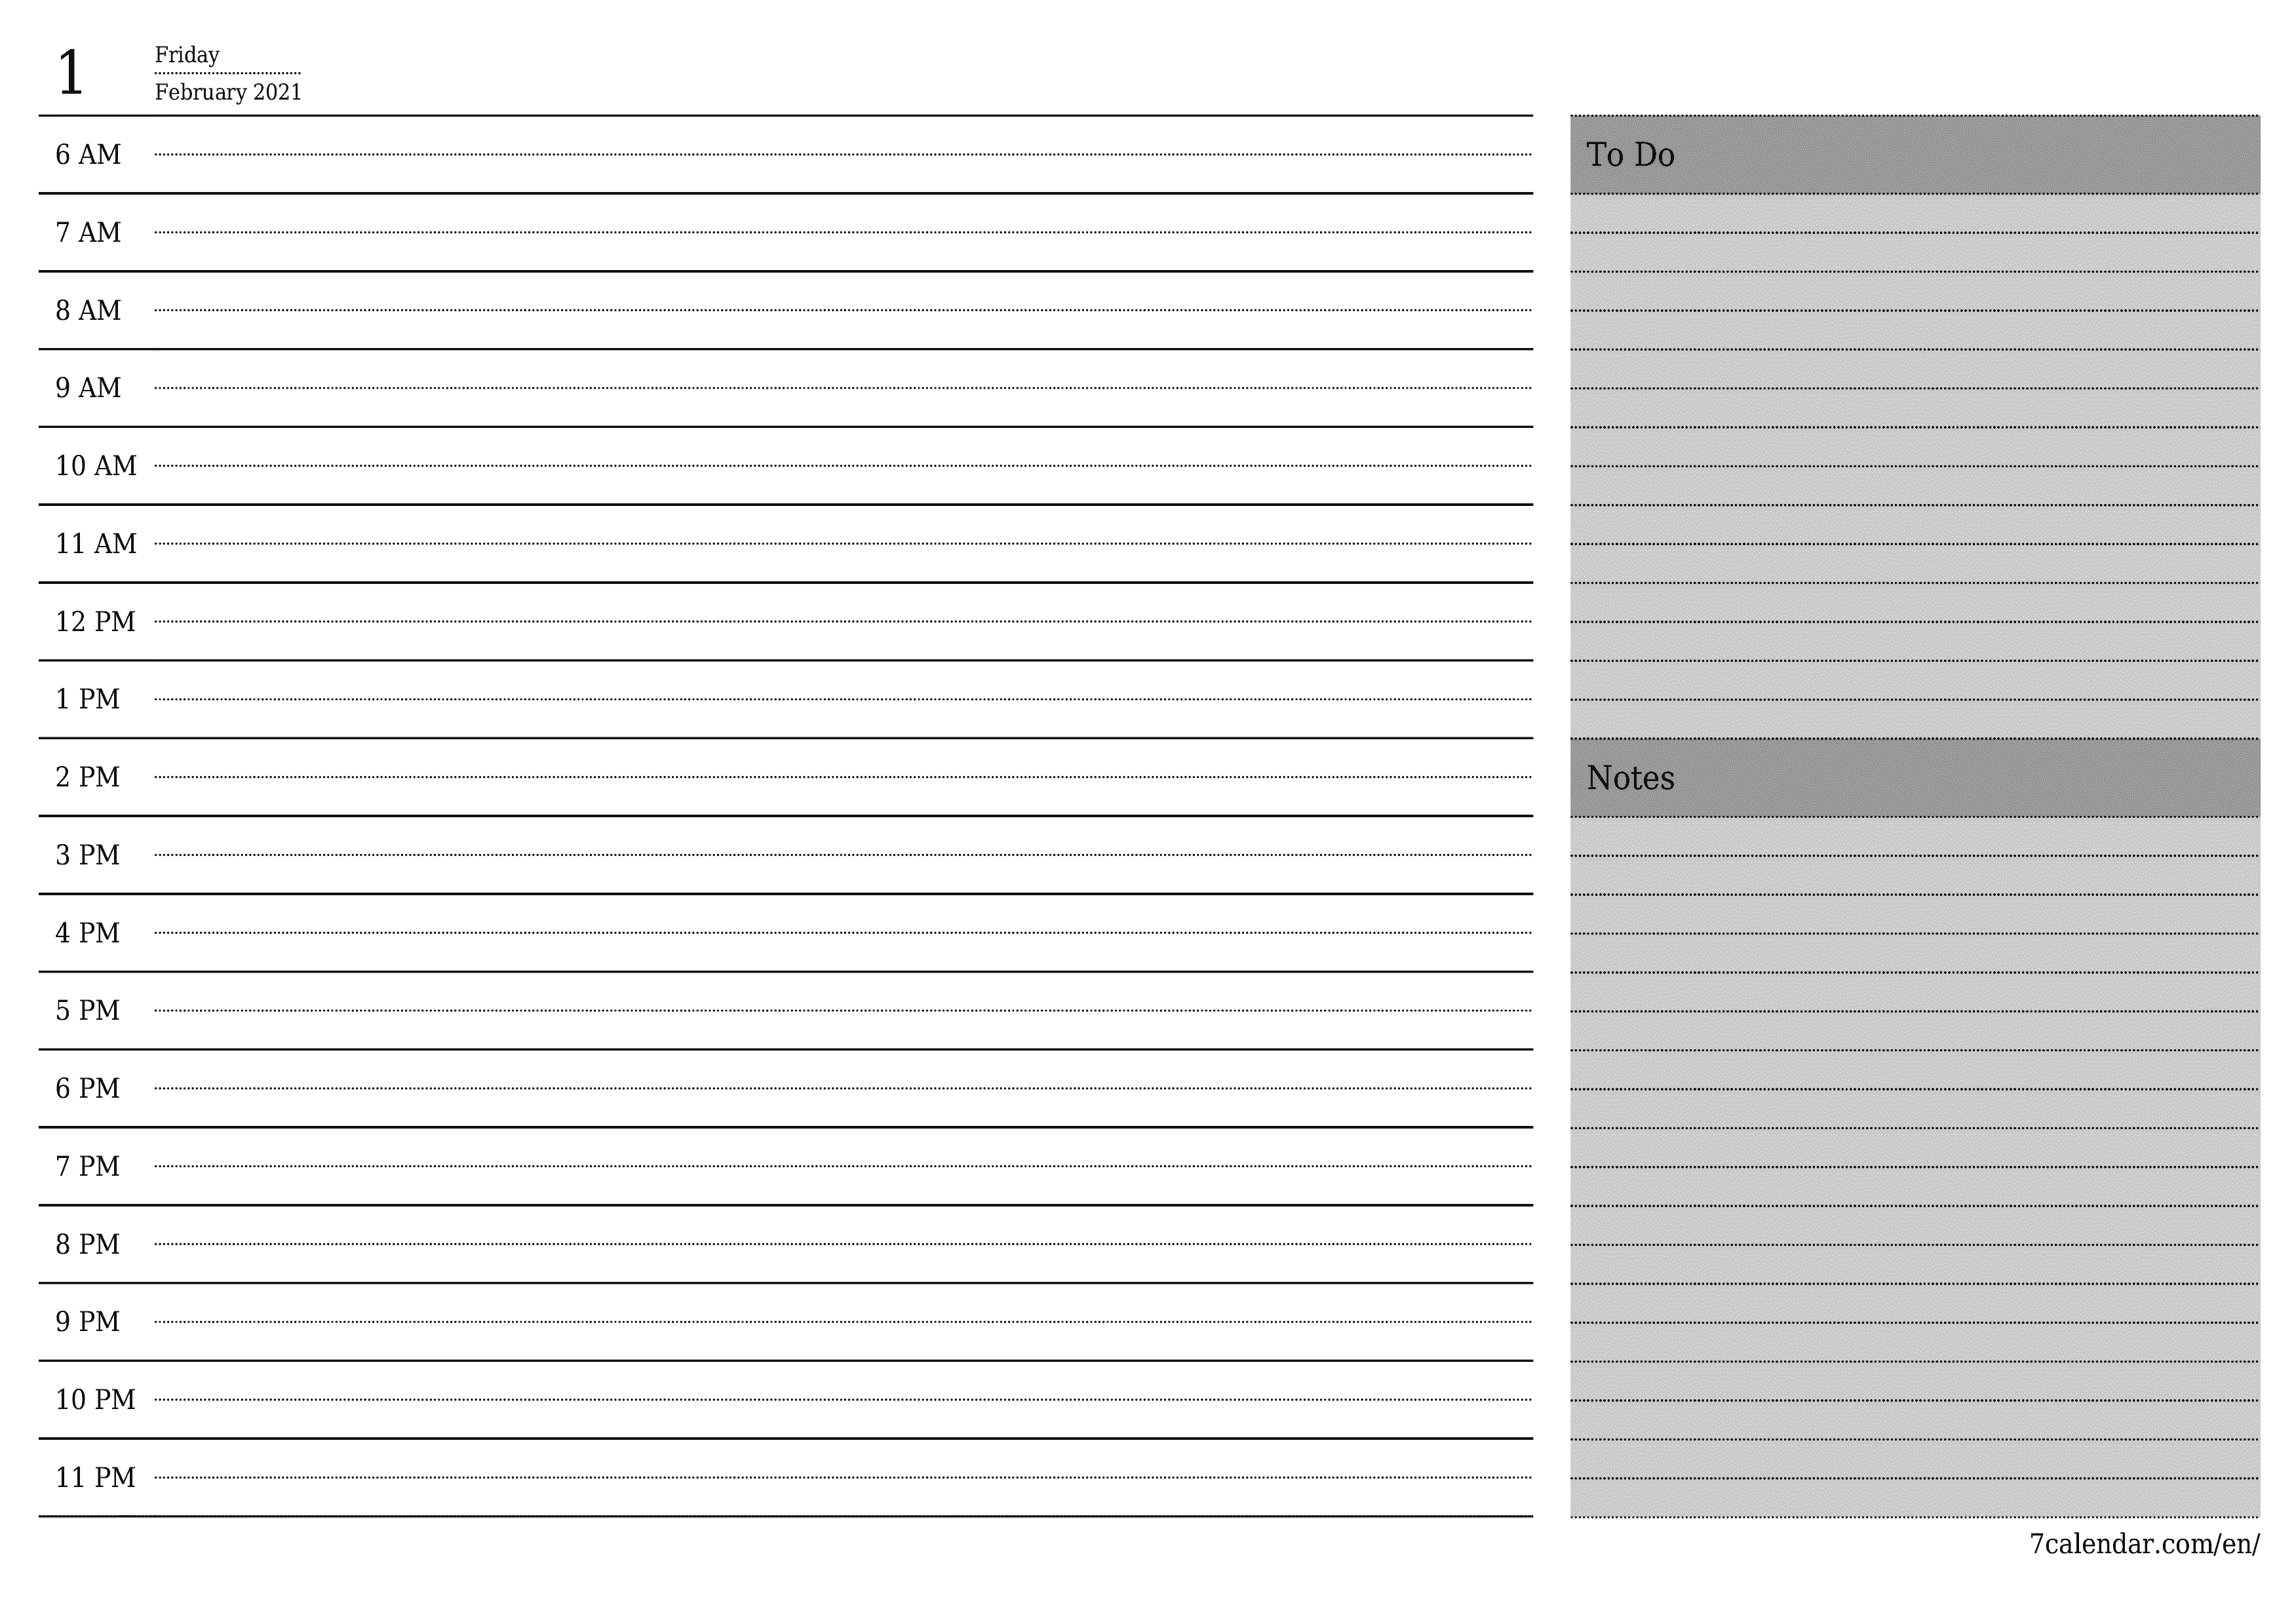 Blank daily calendar planner for day February 2021 with notes, save and print to PDF PNG English - 7calendar.com